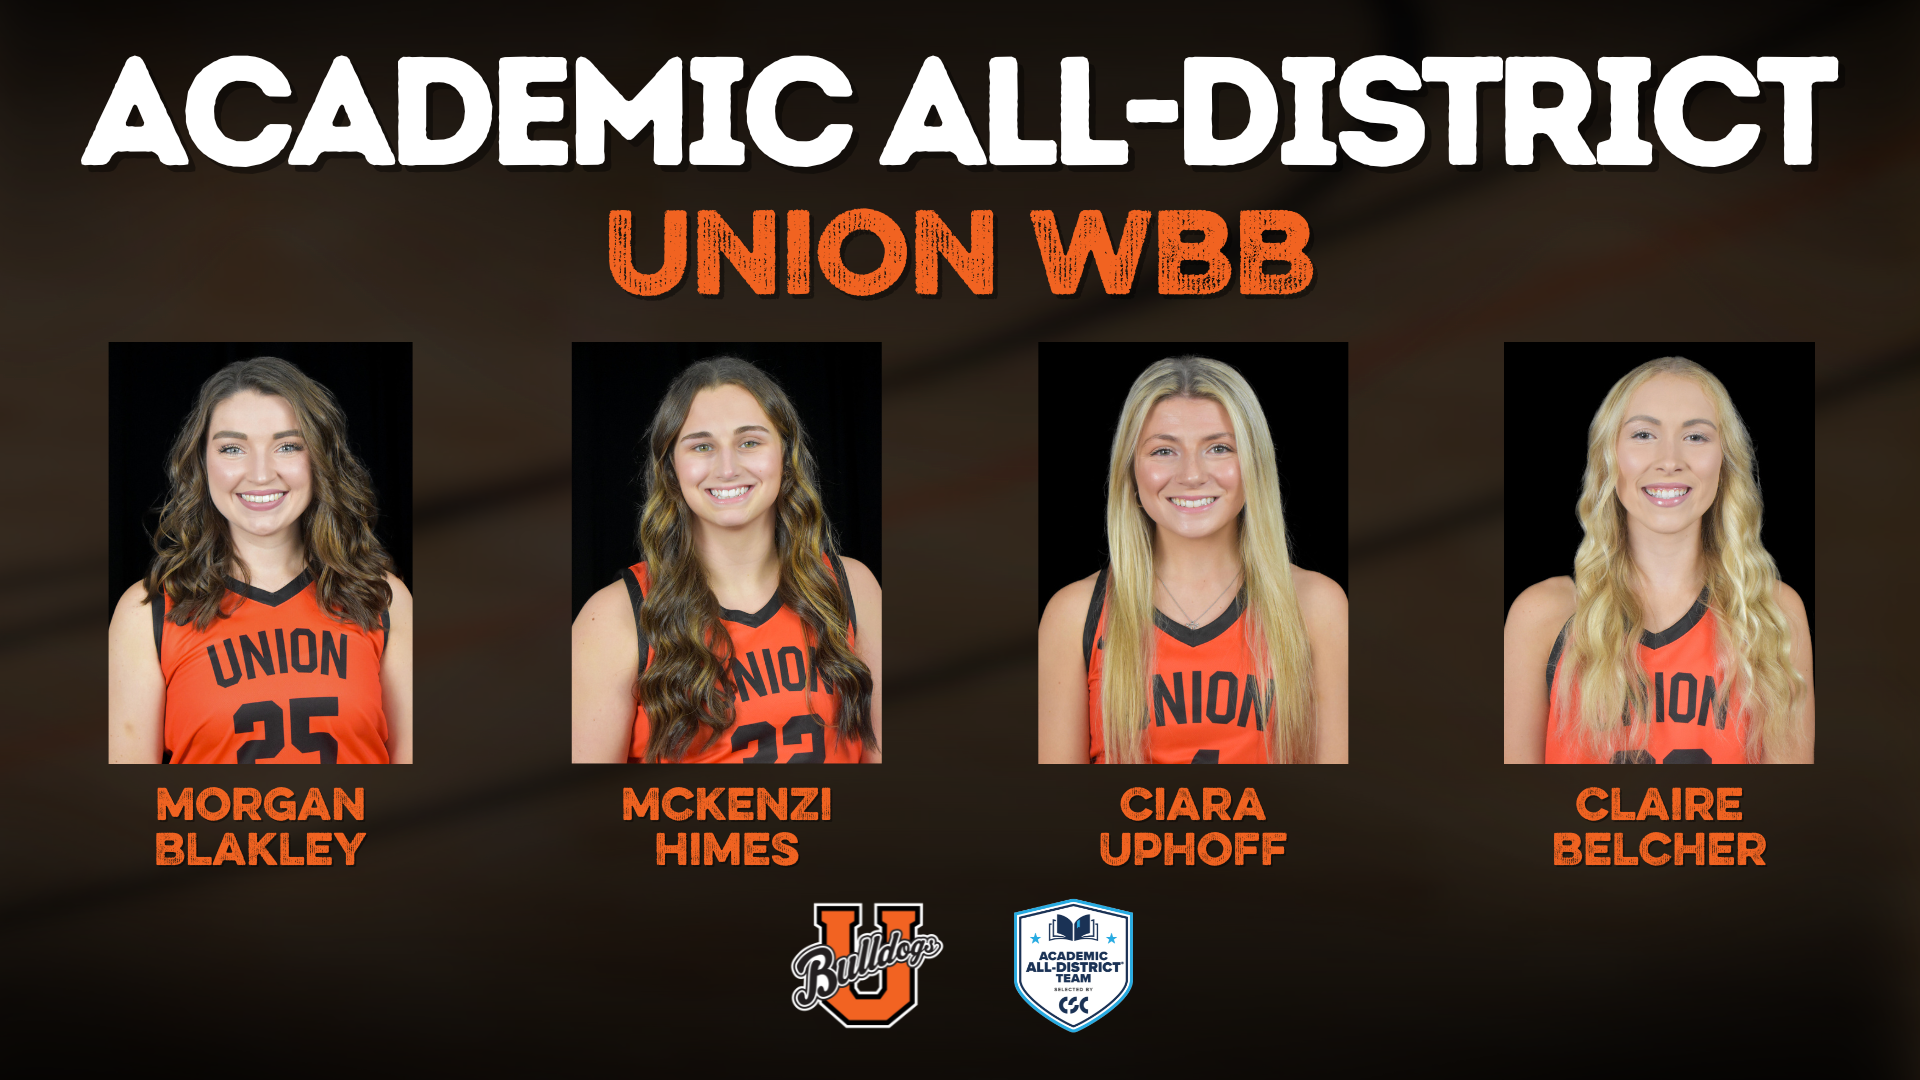 Union WBB has four student-athletes named to CSC Academic All-District Team